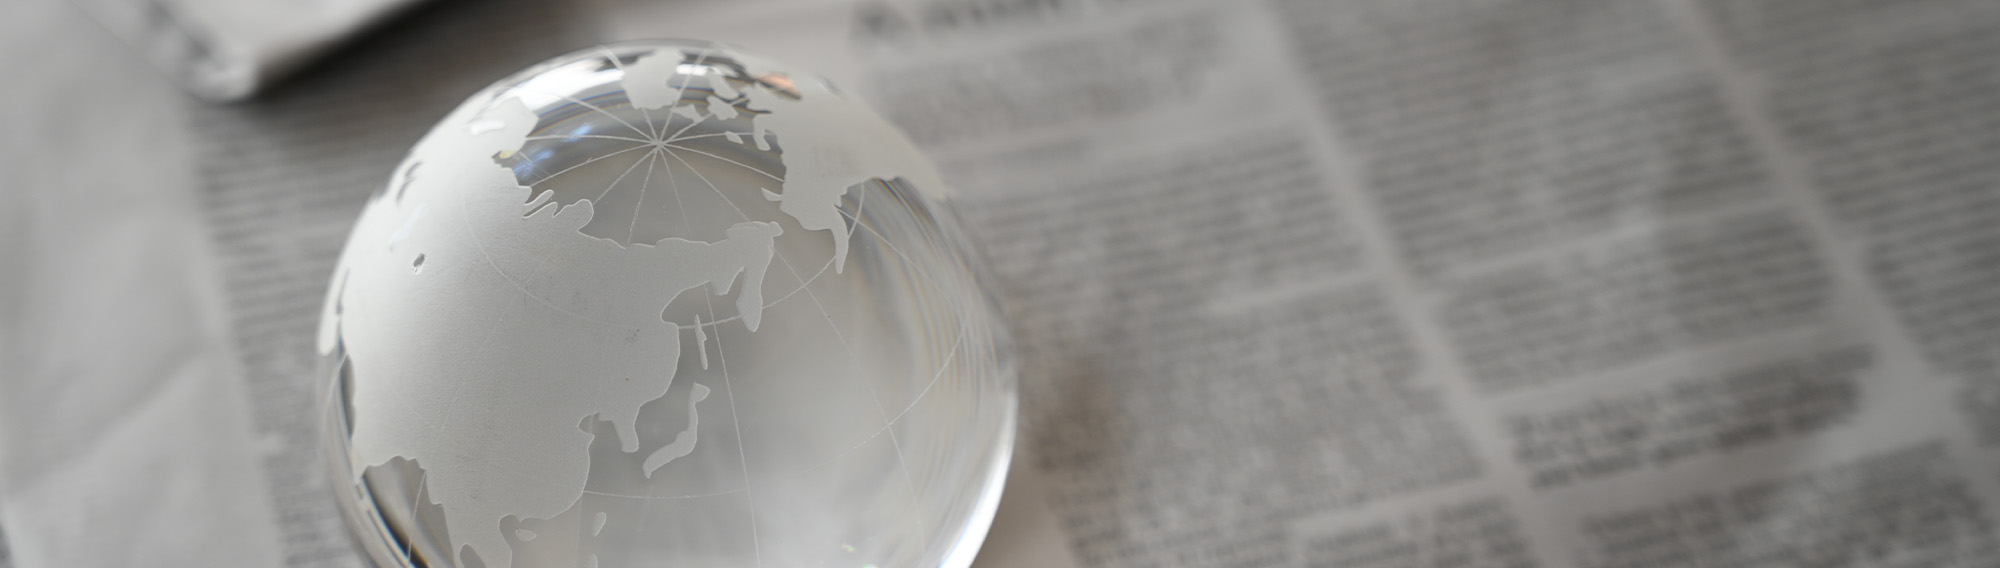 An opaque globe sitting on top of newspapers